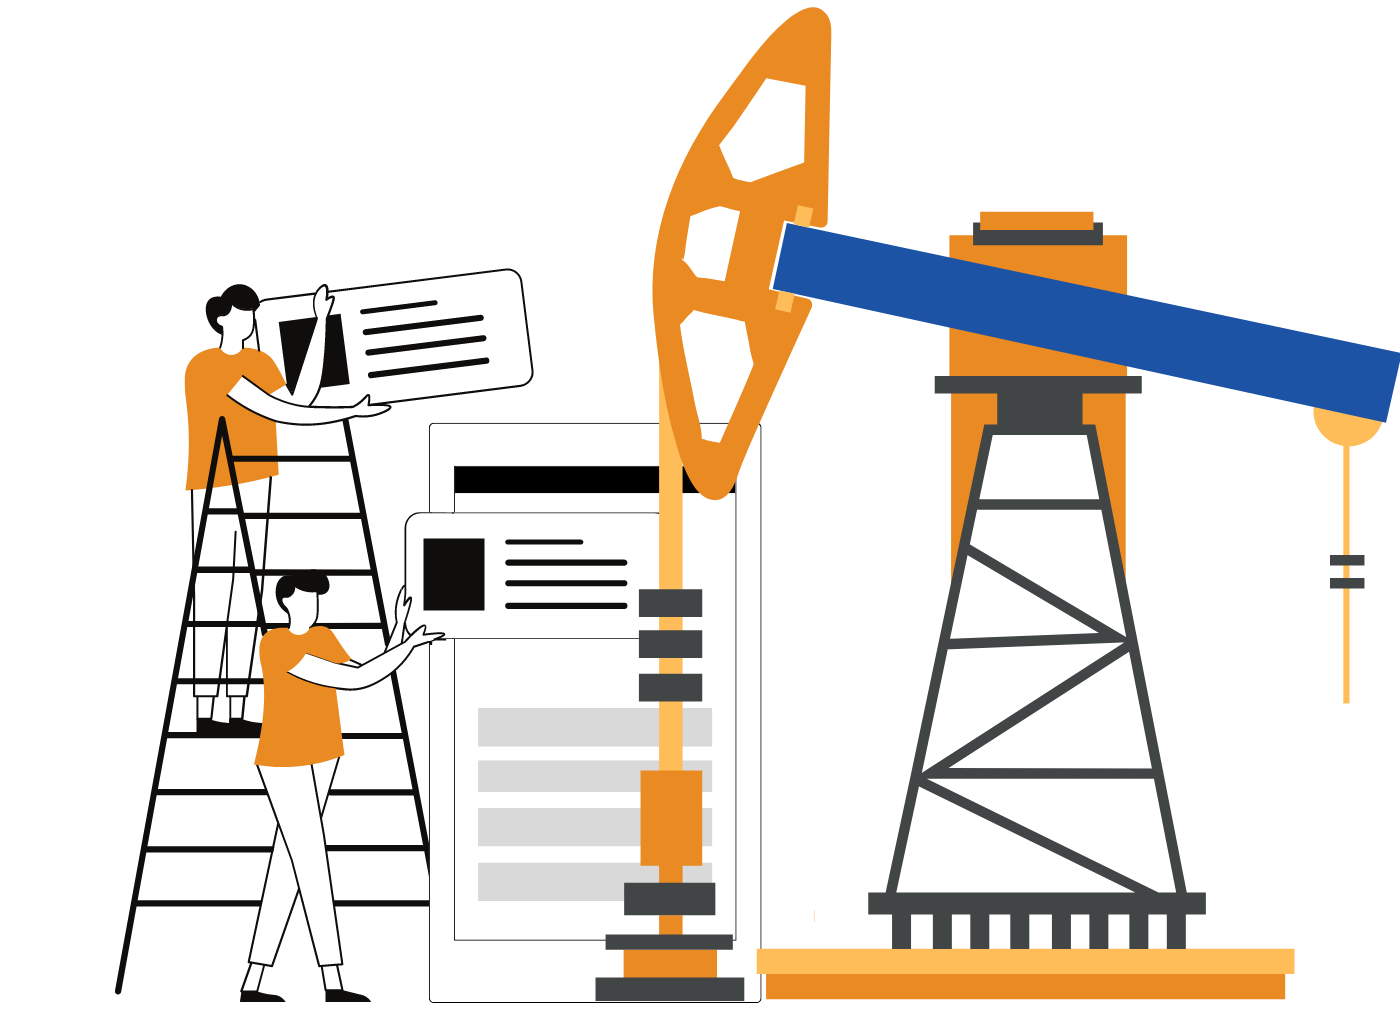 Sales and marketing data in the oil and gas sector.